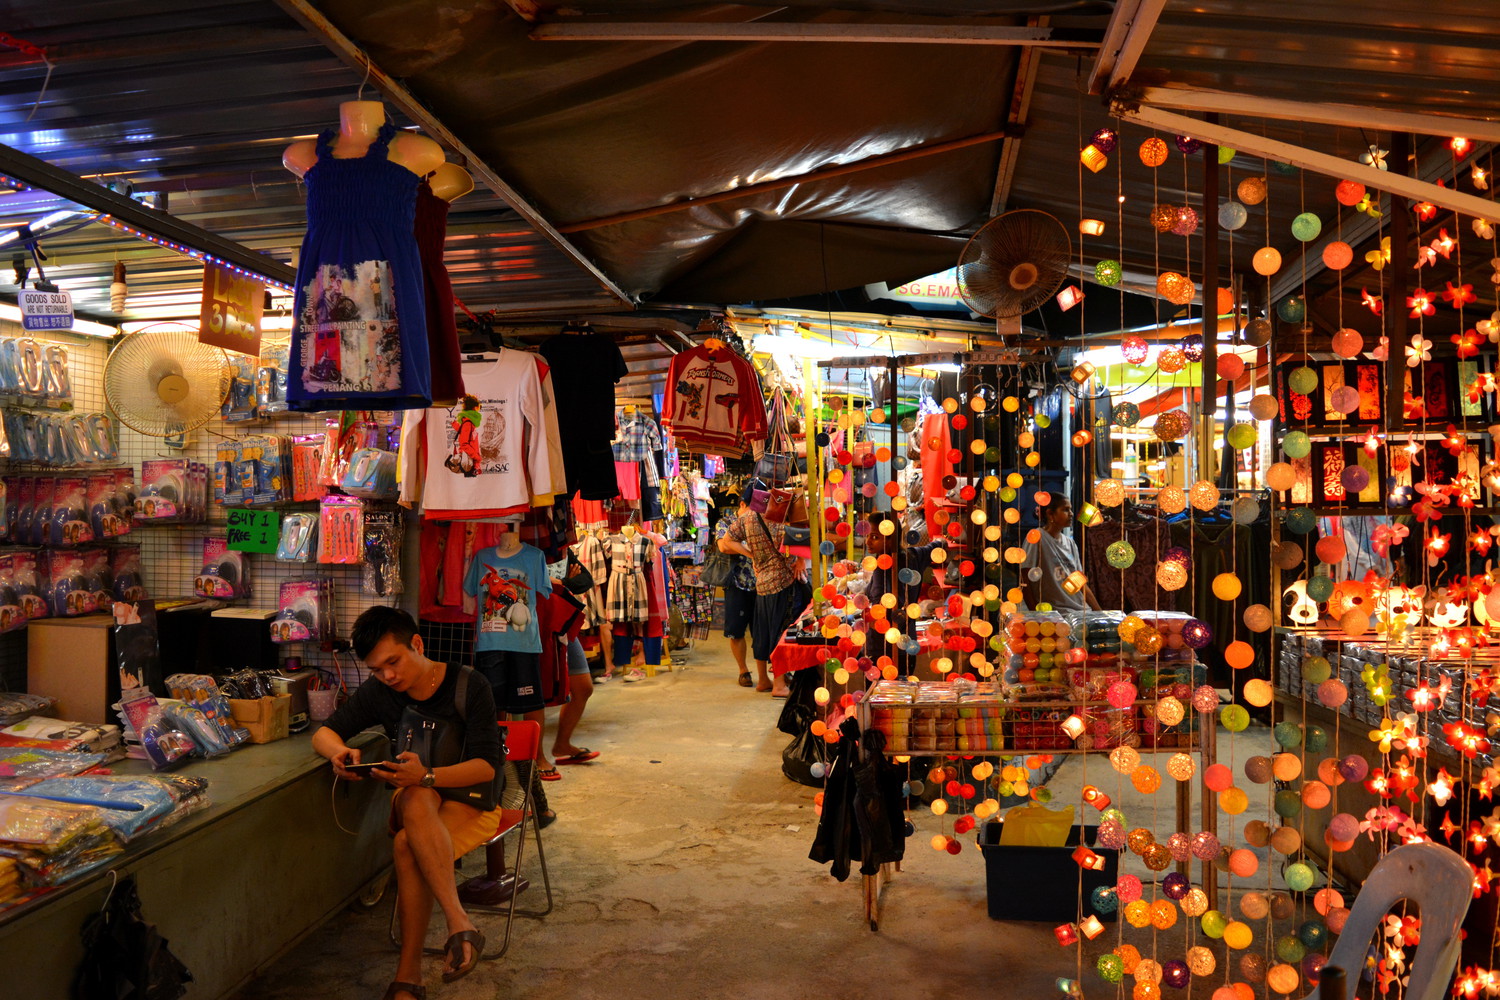 A night market with clothes, electric lamps, photo frames, etc. on display